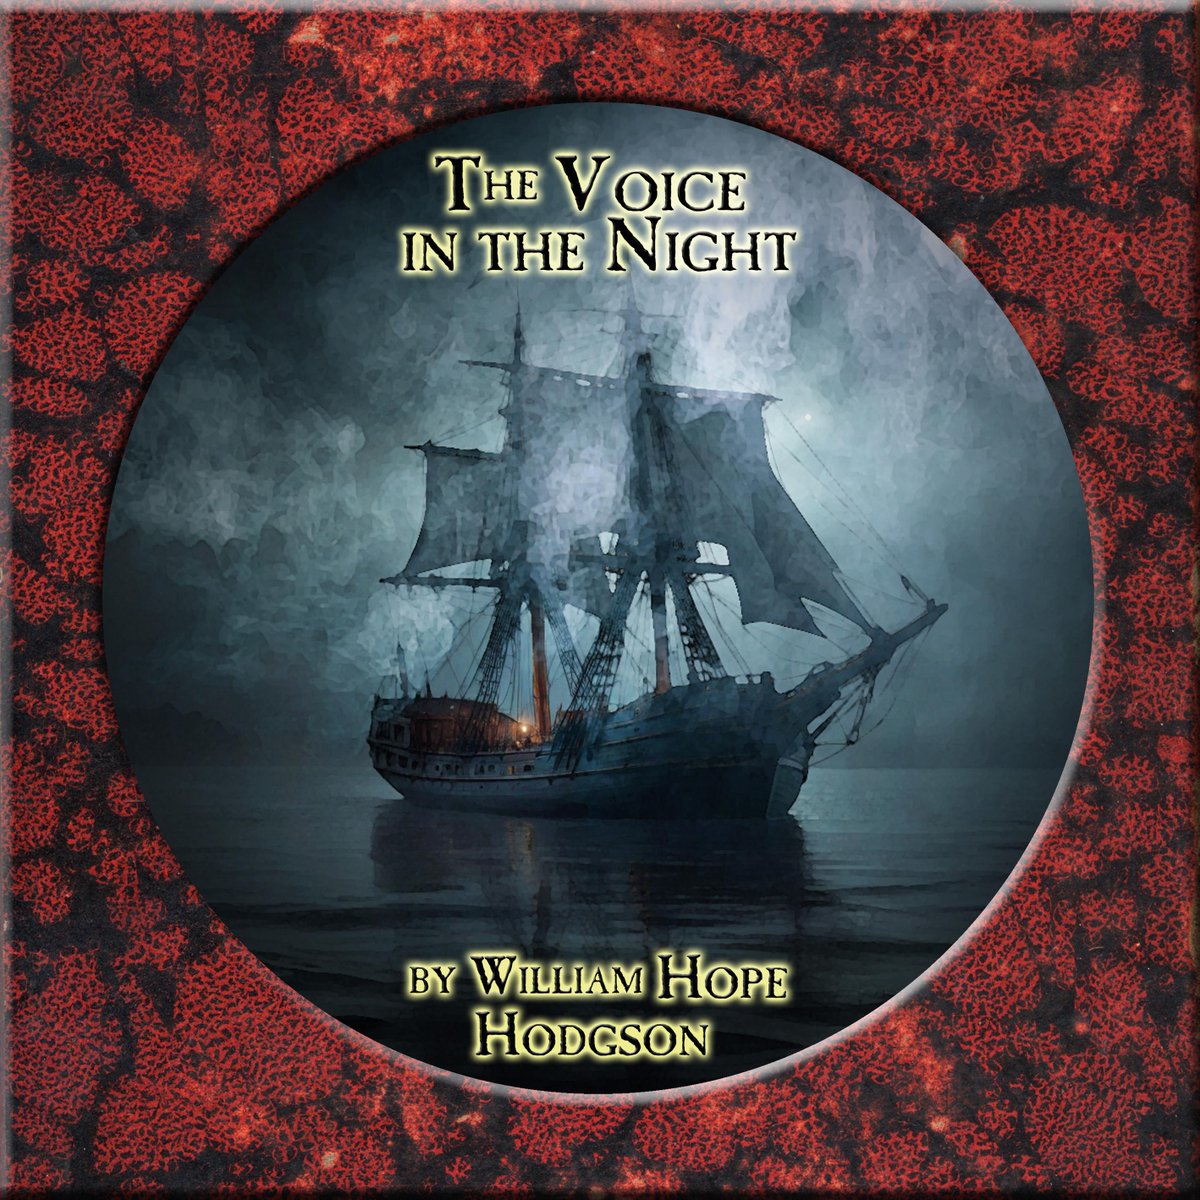 FROM THE GREAT LIBRARY OF DREAMS 106 - The Voice in the Night by William Hope Hodgson

Mr Jim reads a massively influential chiller, an otherworldly tale of maritime terror 

hypnogoria.com/gl_voice.html

#podcast #ghoststories  #horror #WeirdFiction